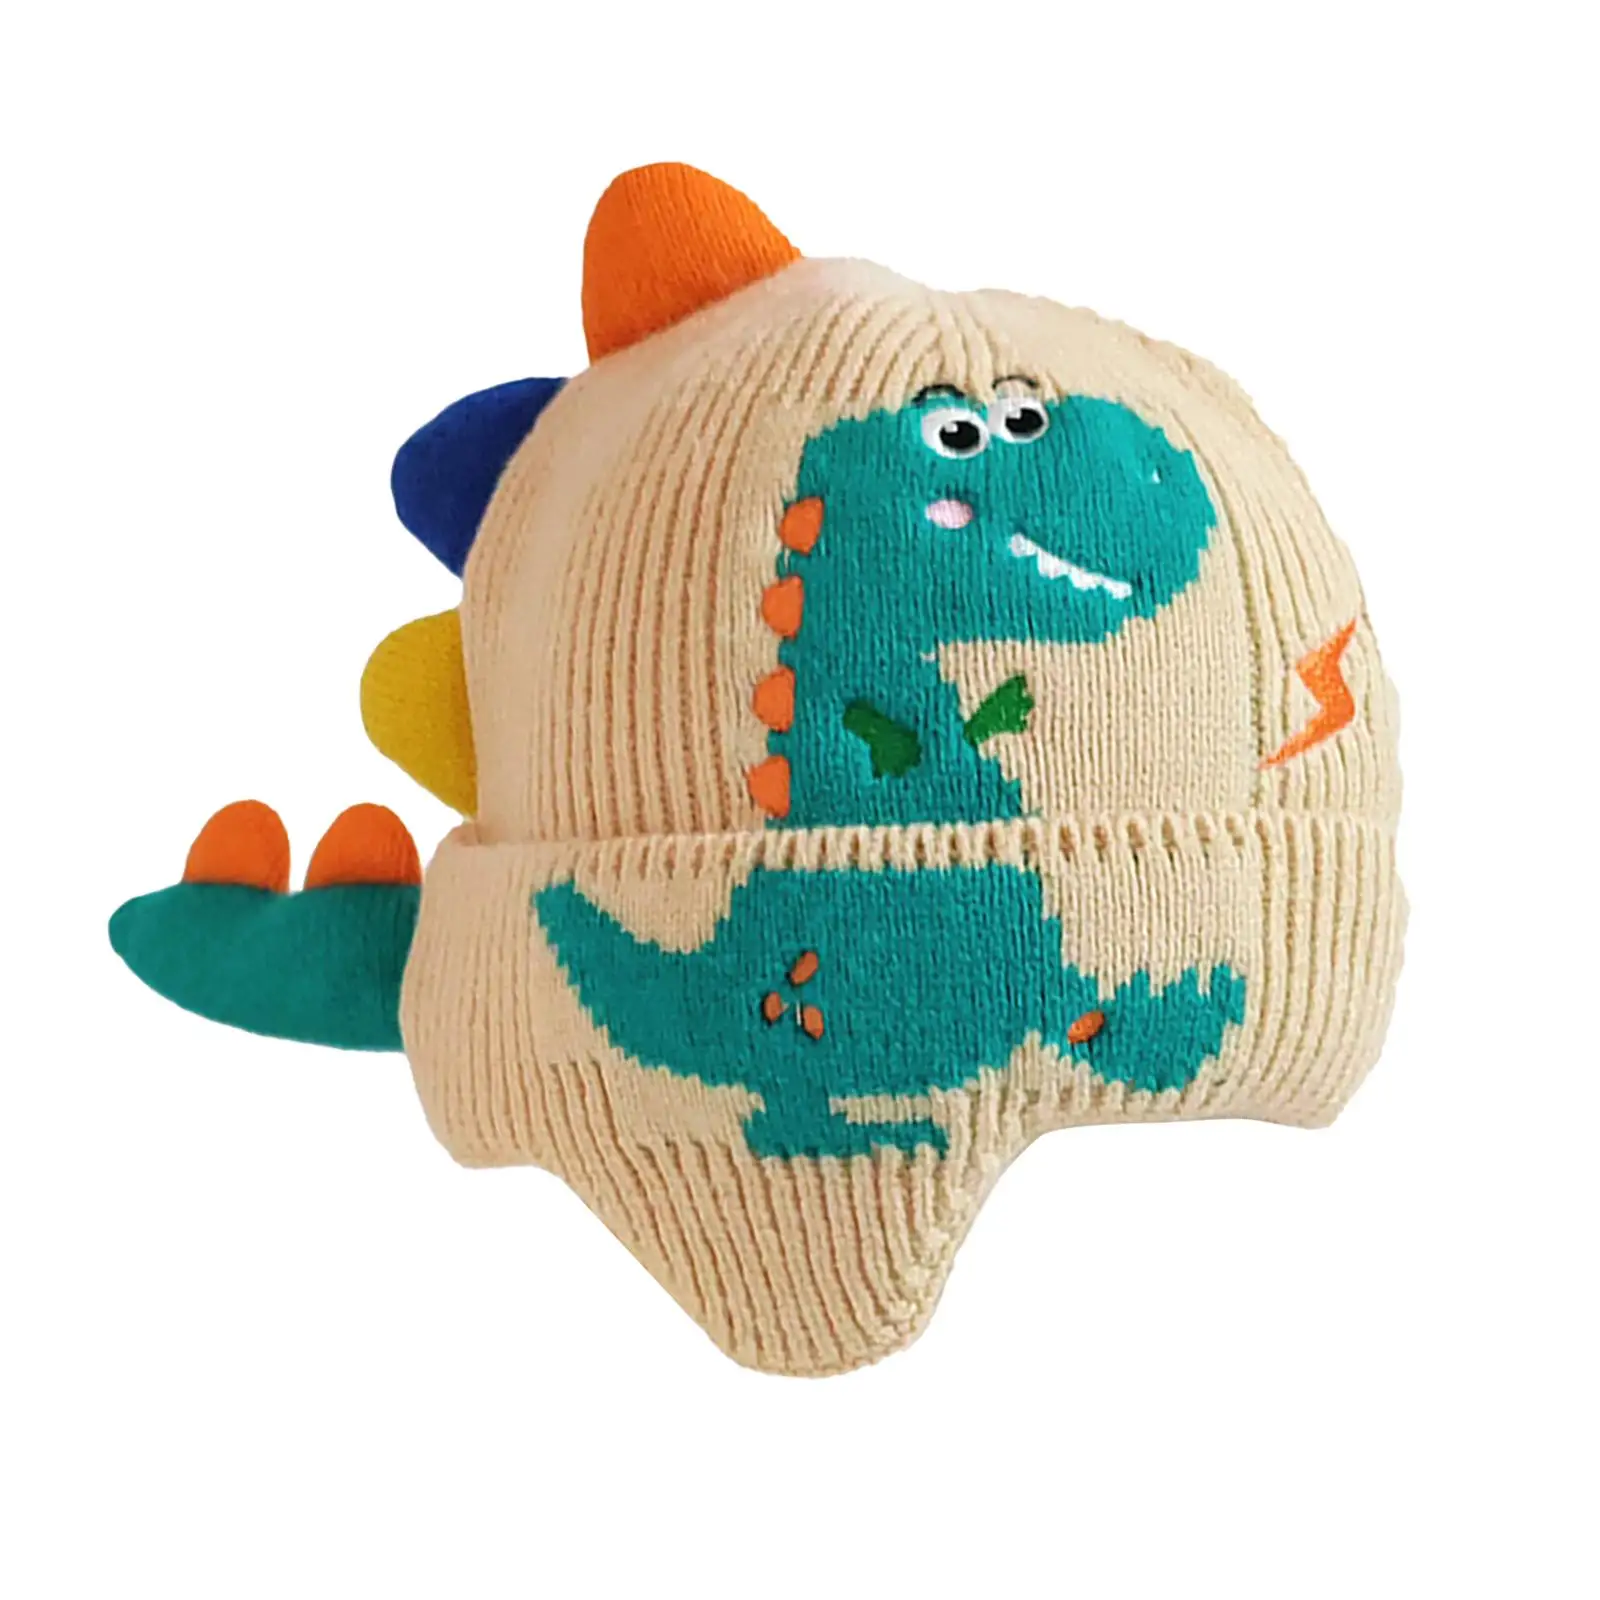 Dinosaur Ear Knitted Hat Skiing Hat Knit Hat for Kids Toddlers Boys Girls